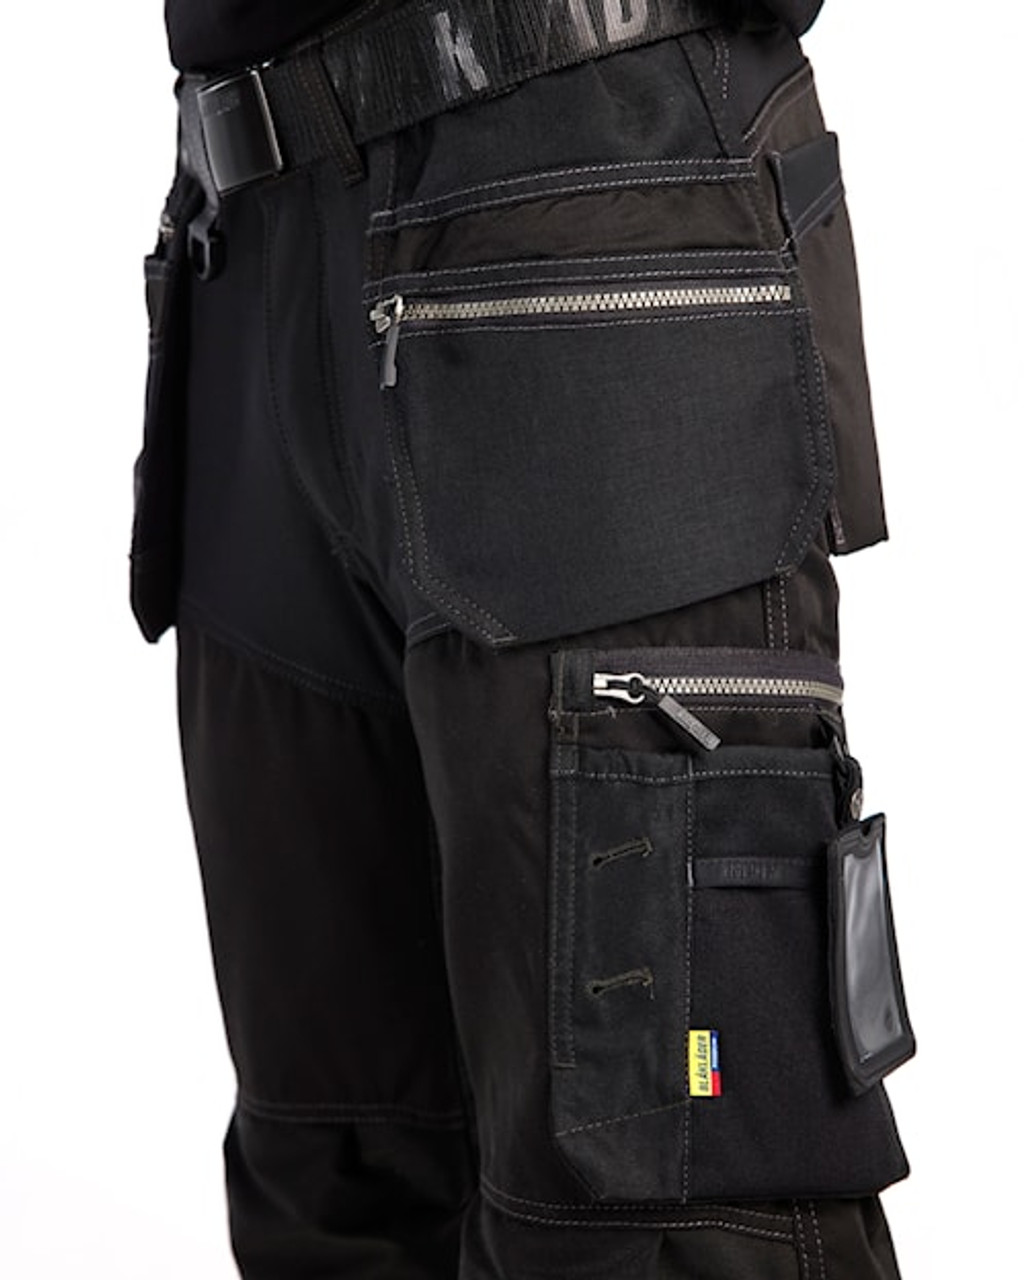 Craftsman Hardware supplies BLAKLADER Euro workwear range including Trousers with Holster Pockets for the Electricians in areas like Melbourne